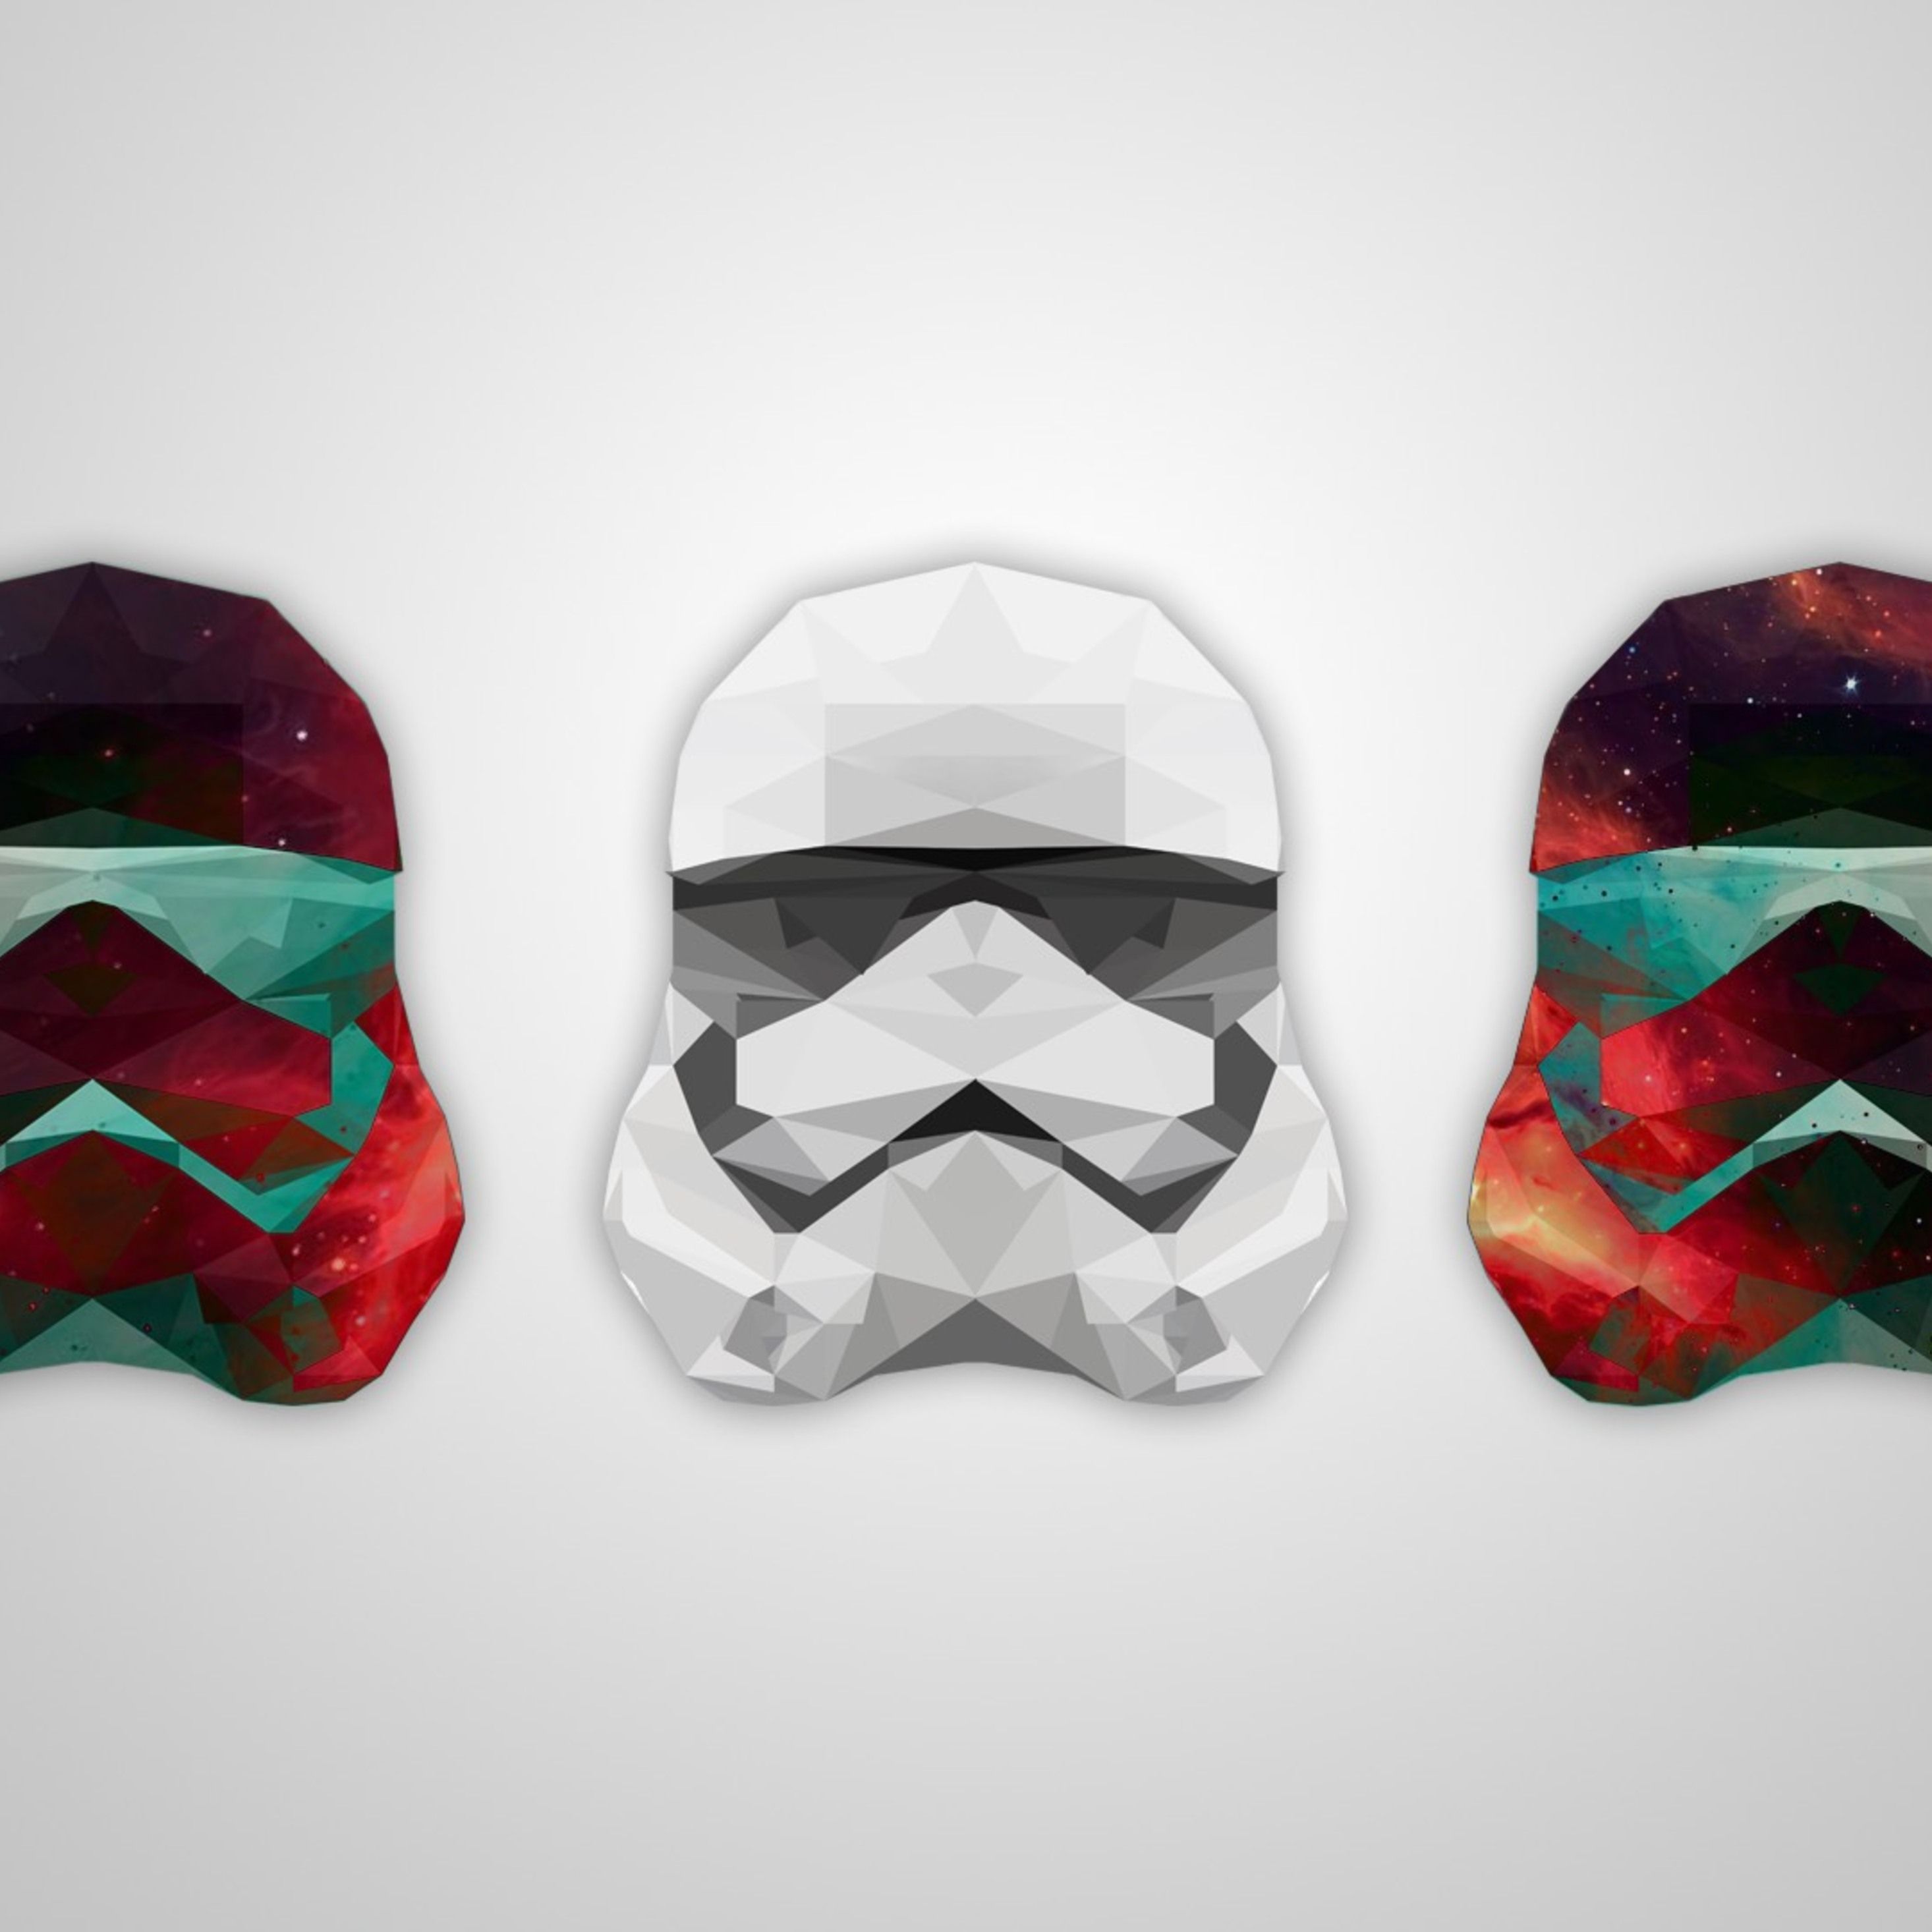 Abstract Artistic Helmet Stormtrooper iPad Pro Retina Display HD 4k Wallpaper, Image, Background, Photo and Picture